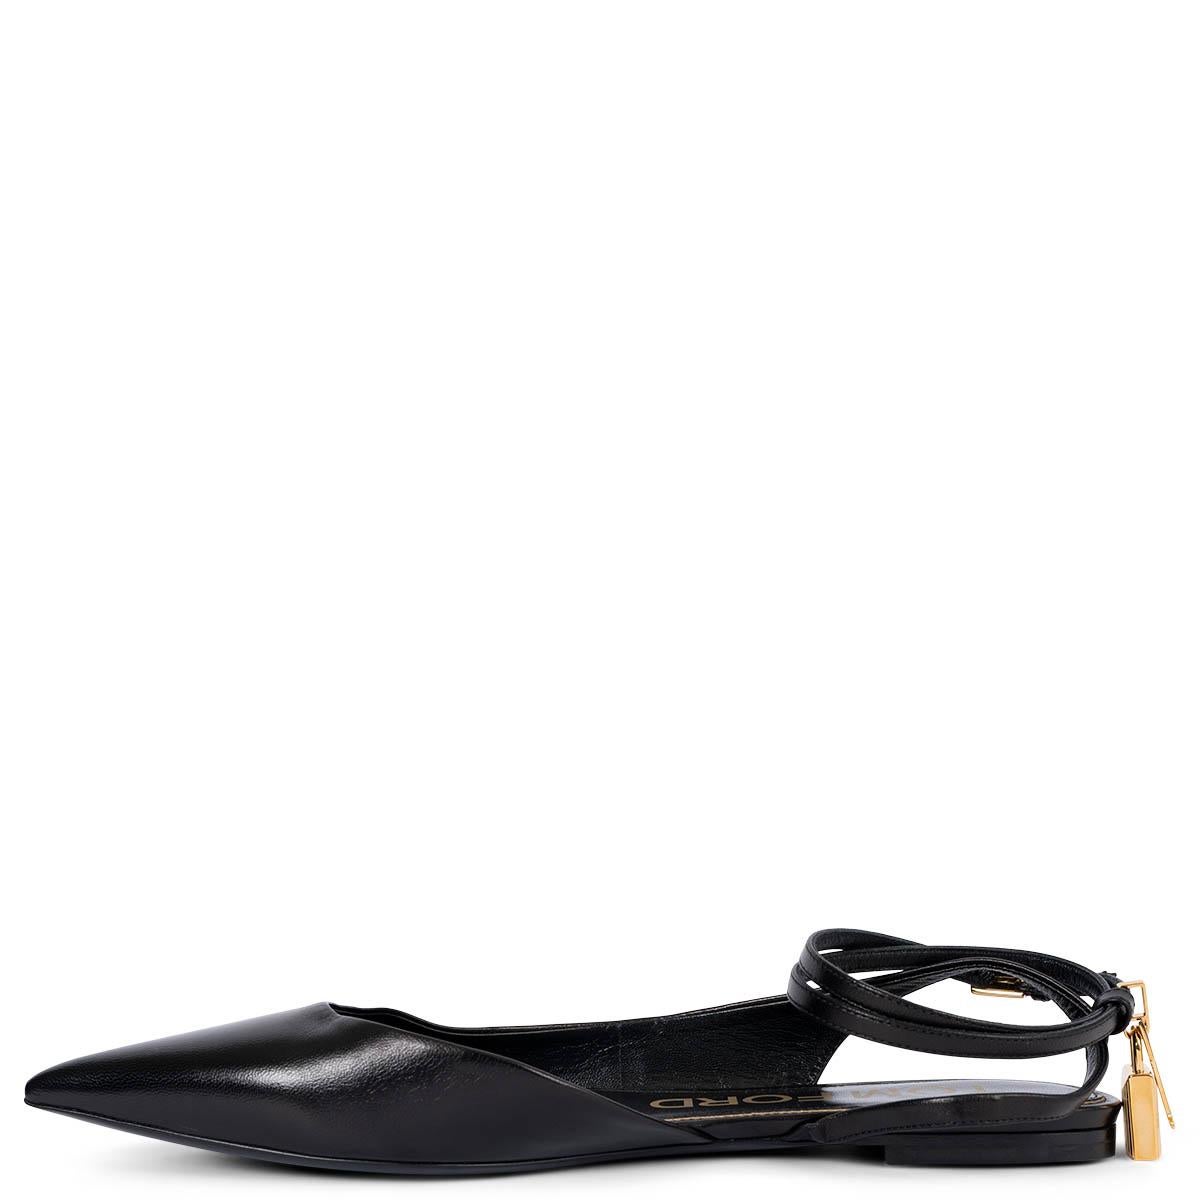 TOM FORD black leather PADLOCK 10MM Ballet Flats Shoes 40 fit 39.5 In New Condition For Sale In Zürich, CH